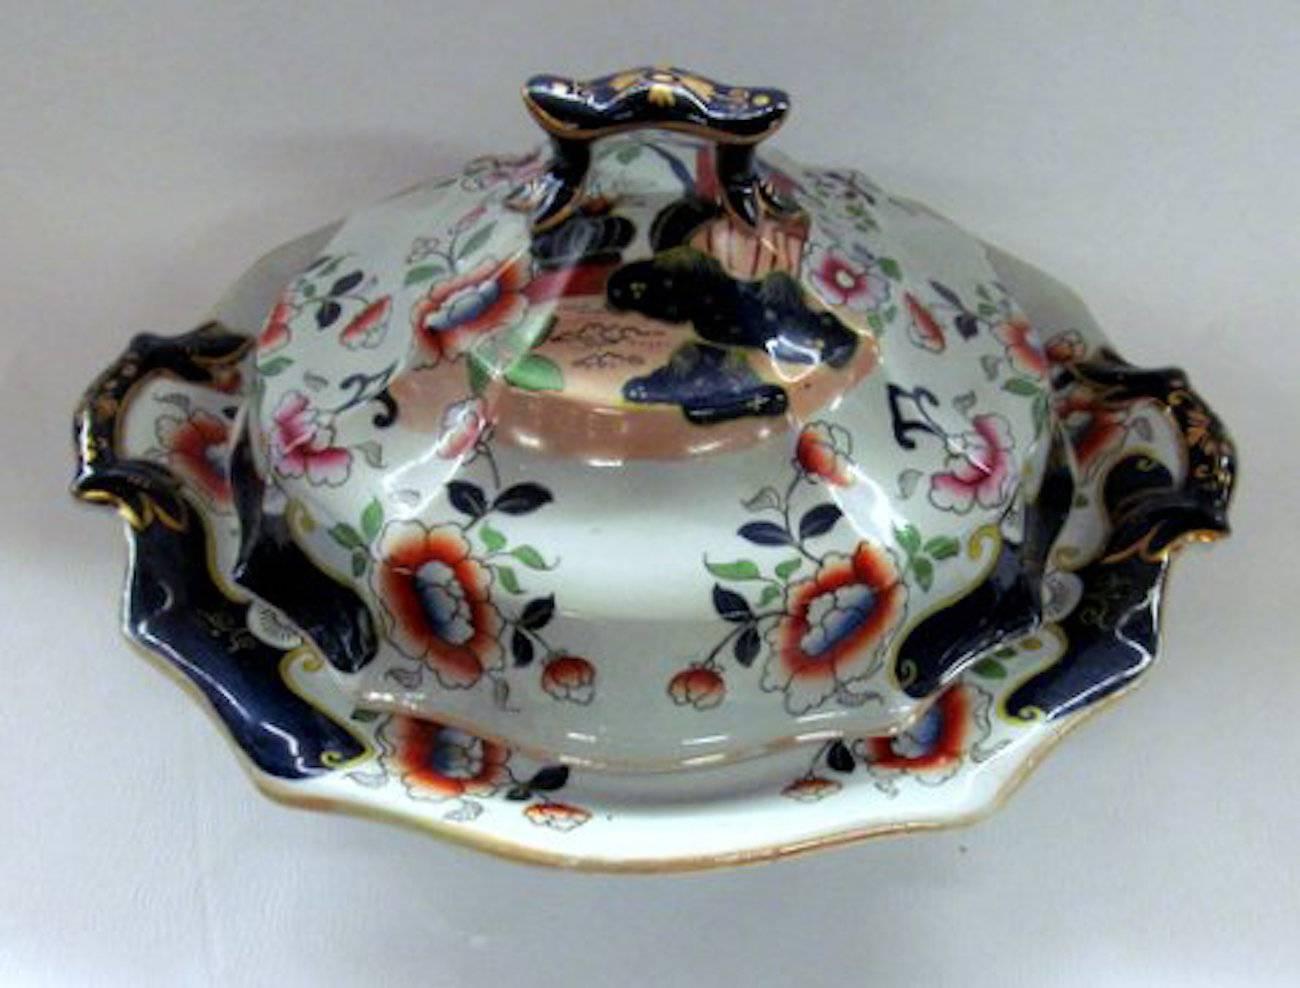 Fabulous quality antique English Hicks, Meigh and Johnson hand-painted Ironstone China Imari decor covered vegetable dish;
richly hand decorated, with under glaze maker's marks on base. Pattern is illustrated on pg. 231 in Godden's 